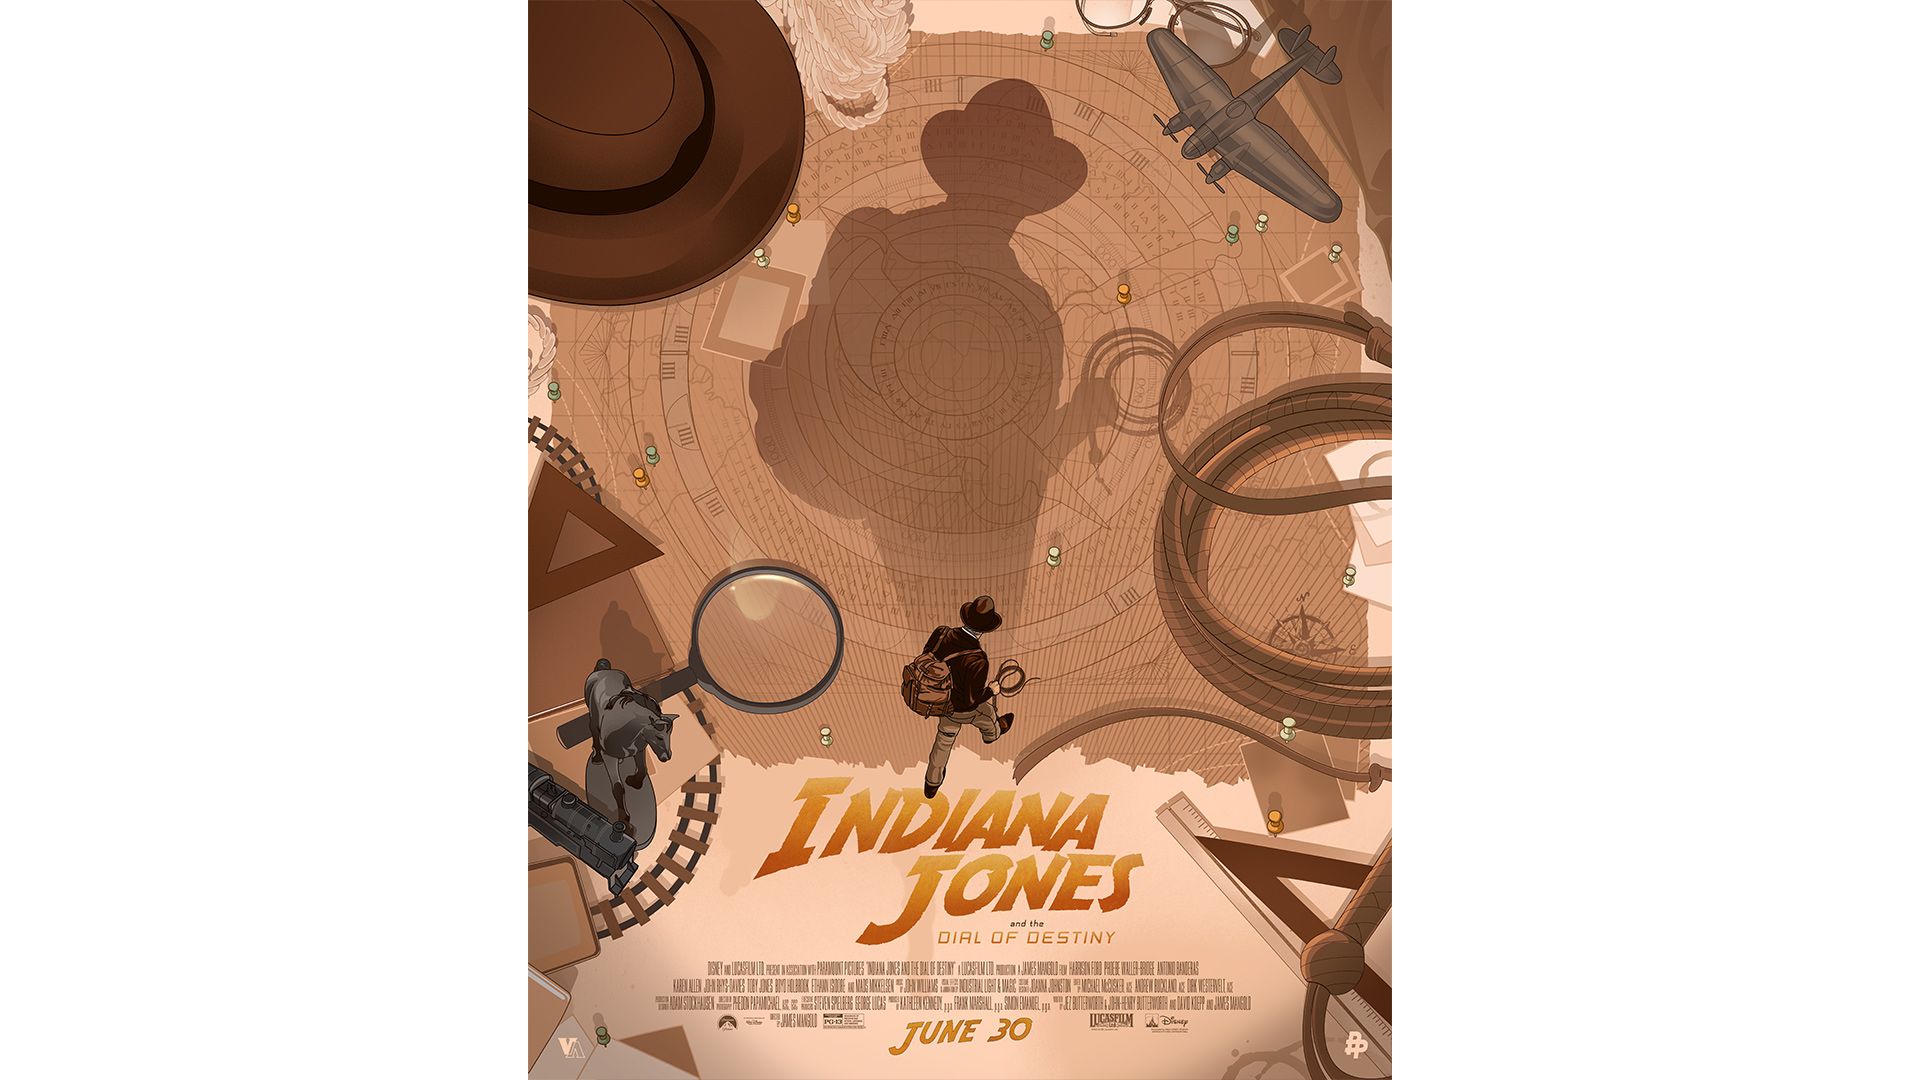 Art by Vincent Aseo inspired by Indiana Jones and the Dial of Destiny.